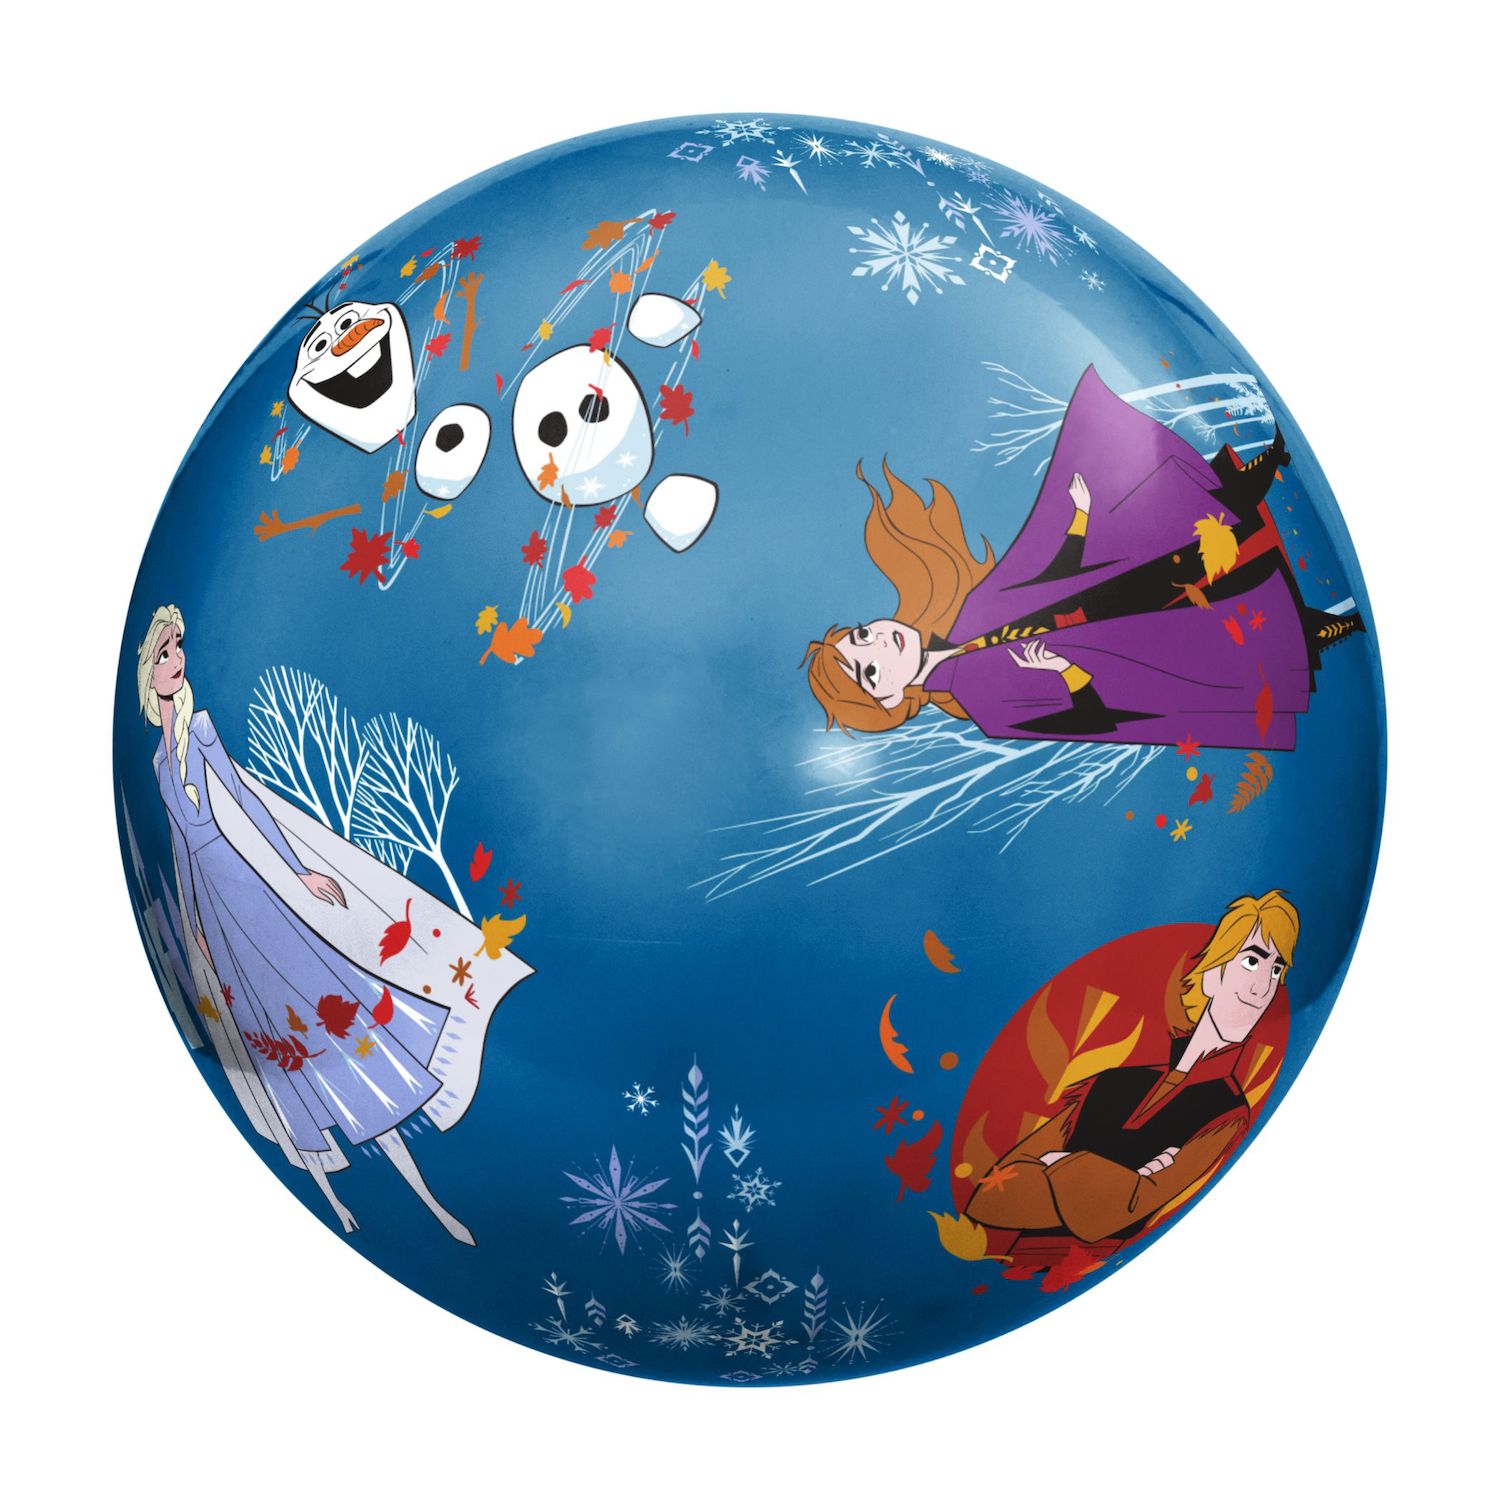 Image for Hedstrom Disney's Frozen 2 20-Inch Super Bouncin' Ball with Pump at Kohl's.